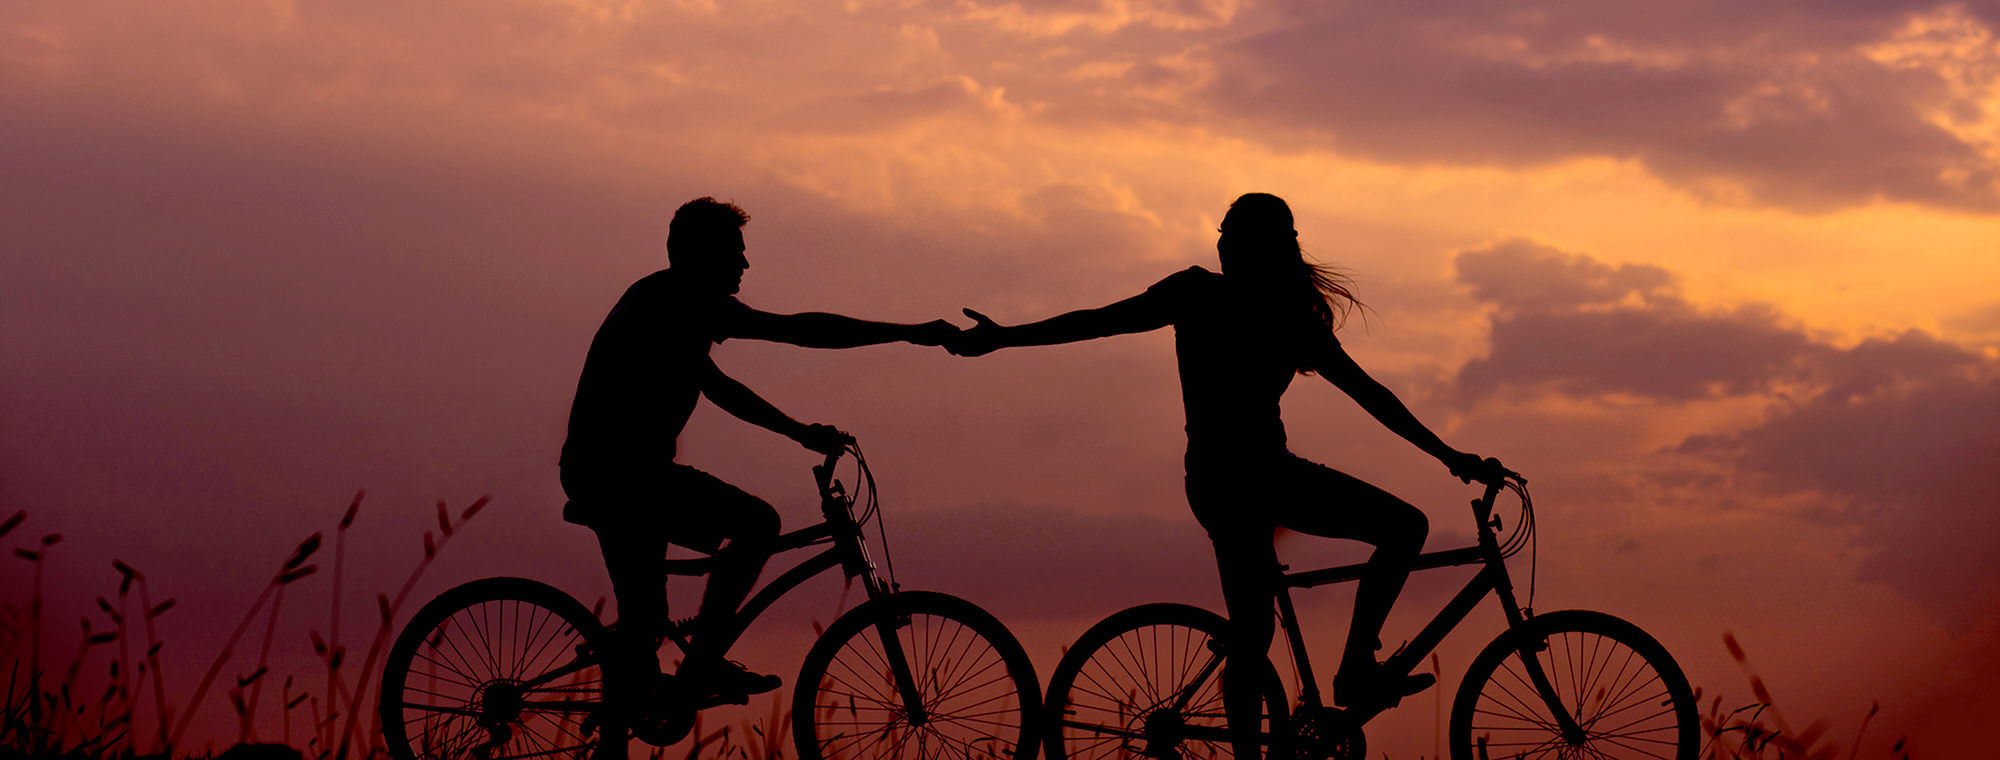 A woman and man biking, silhouetted against a sunset. The women is biking in front and reaching back to hold hands with the man.